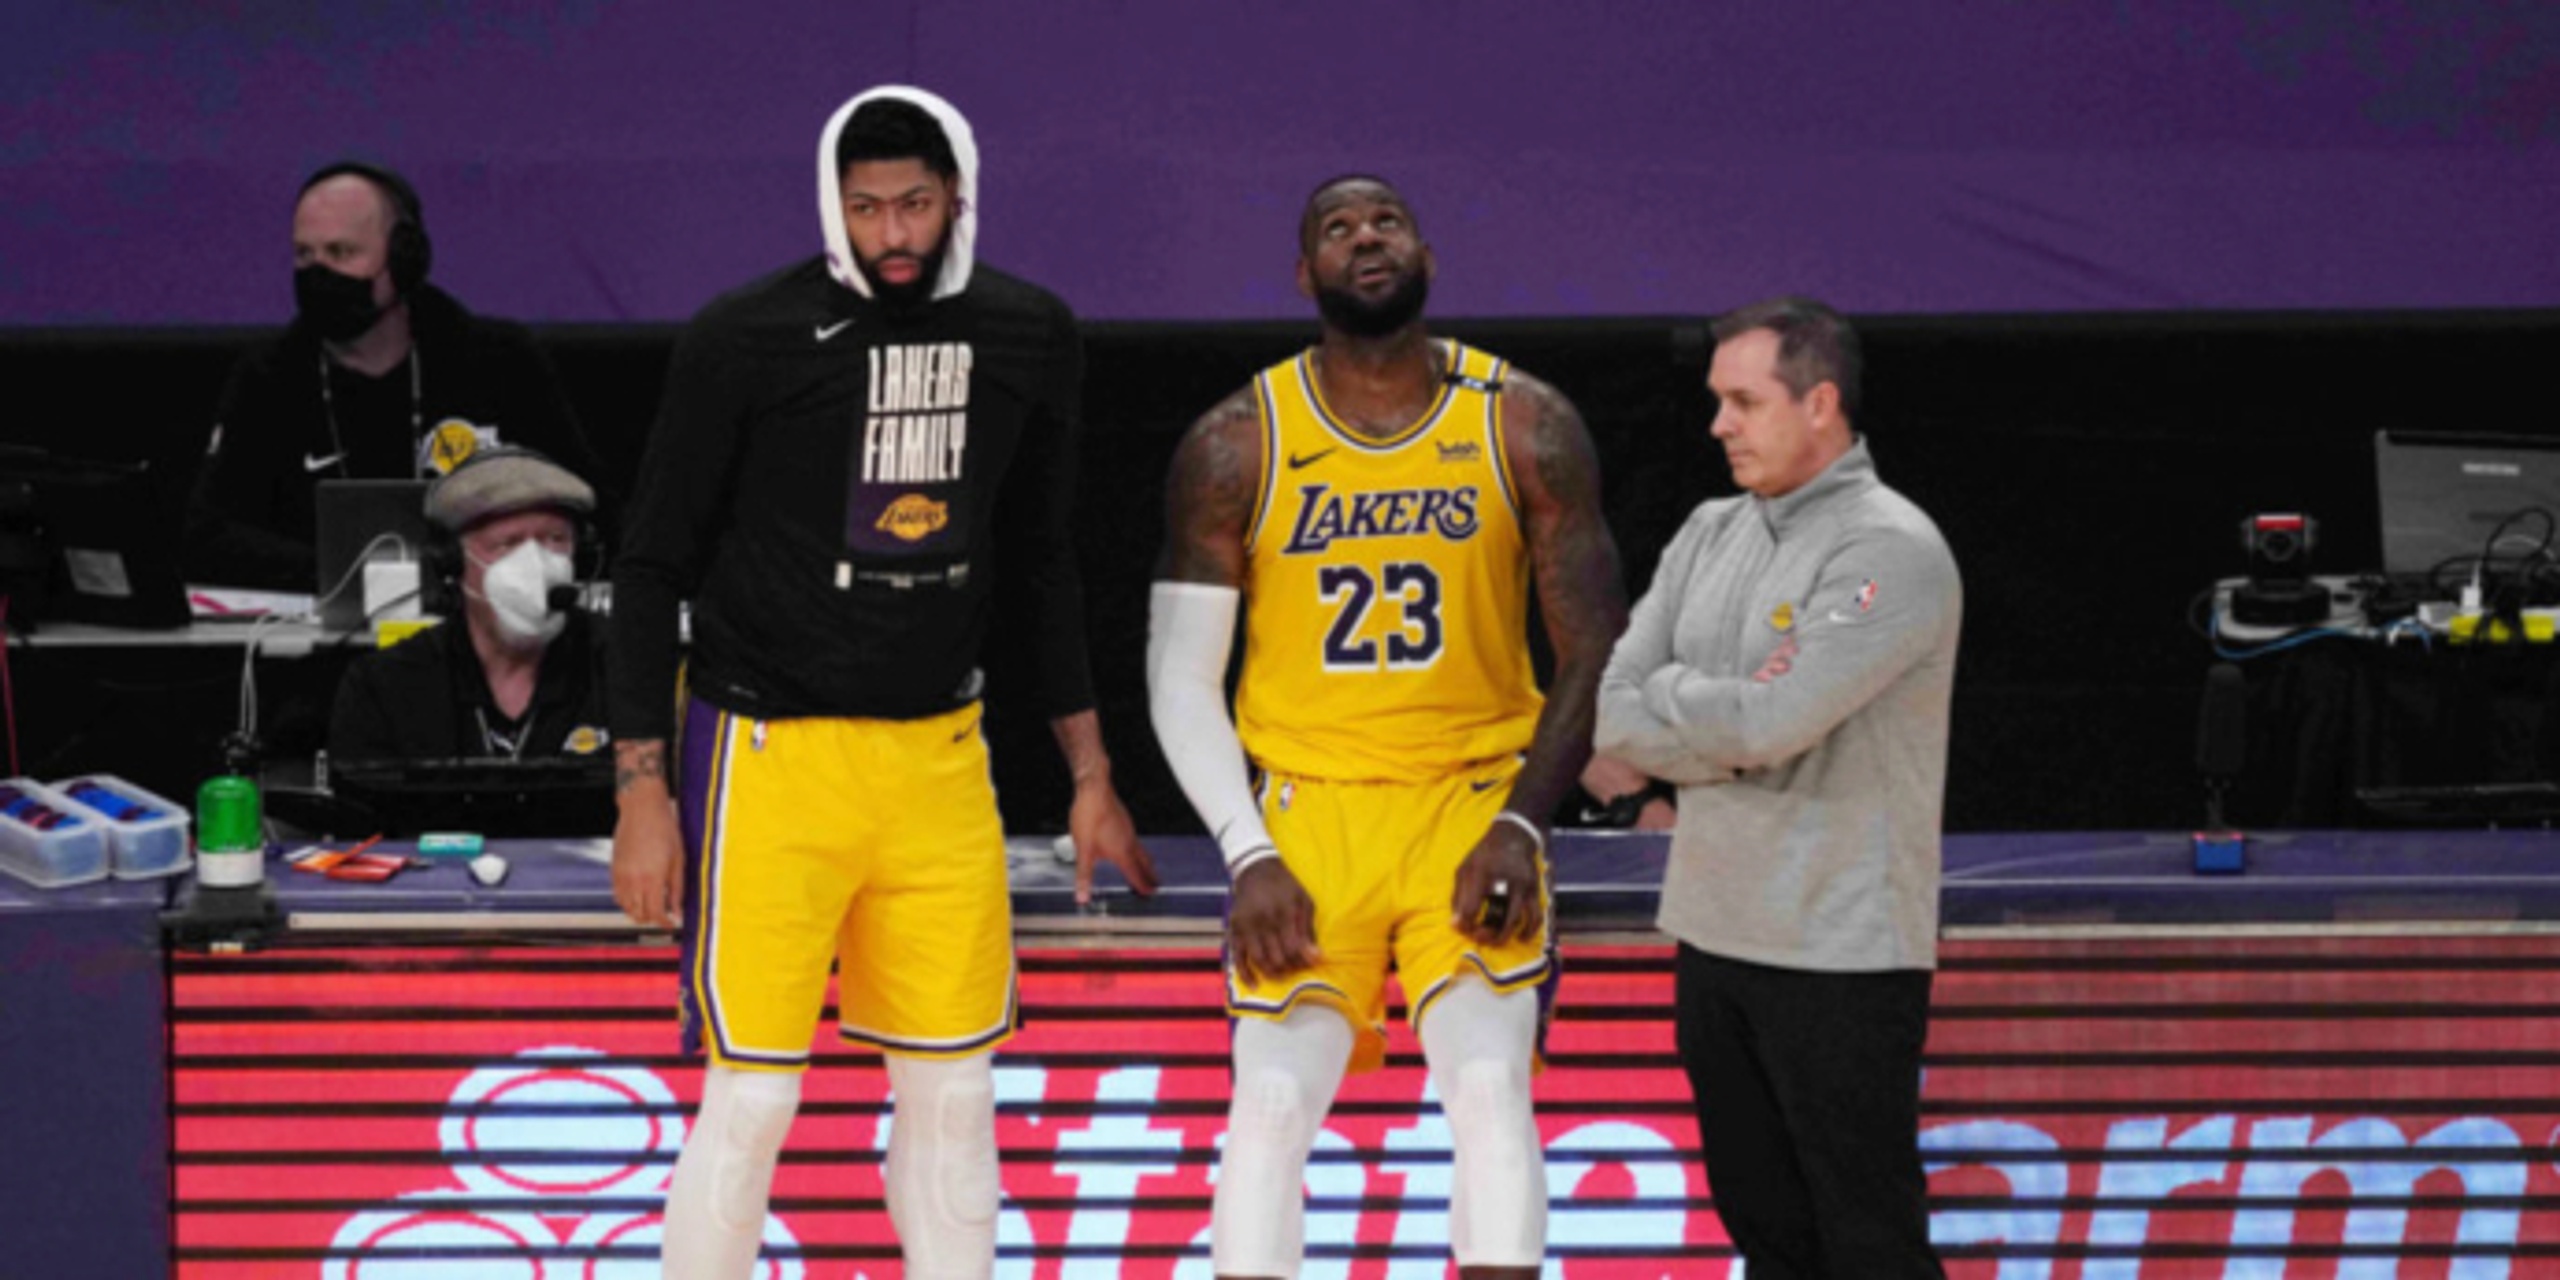 What do the Lakers have to address in the 2021 NBA offseason?